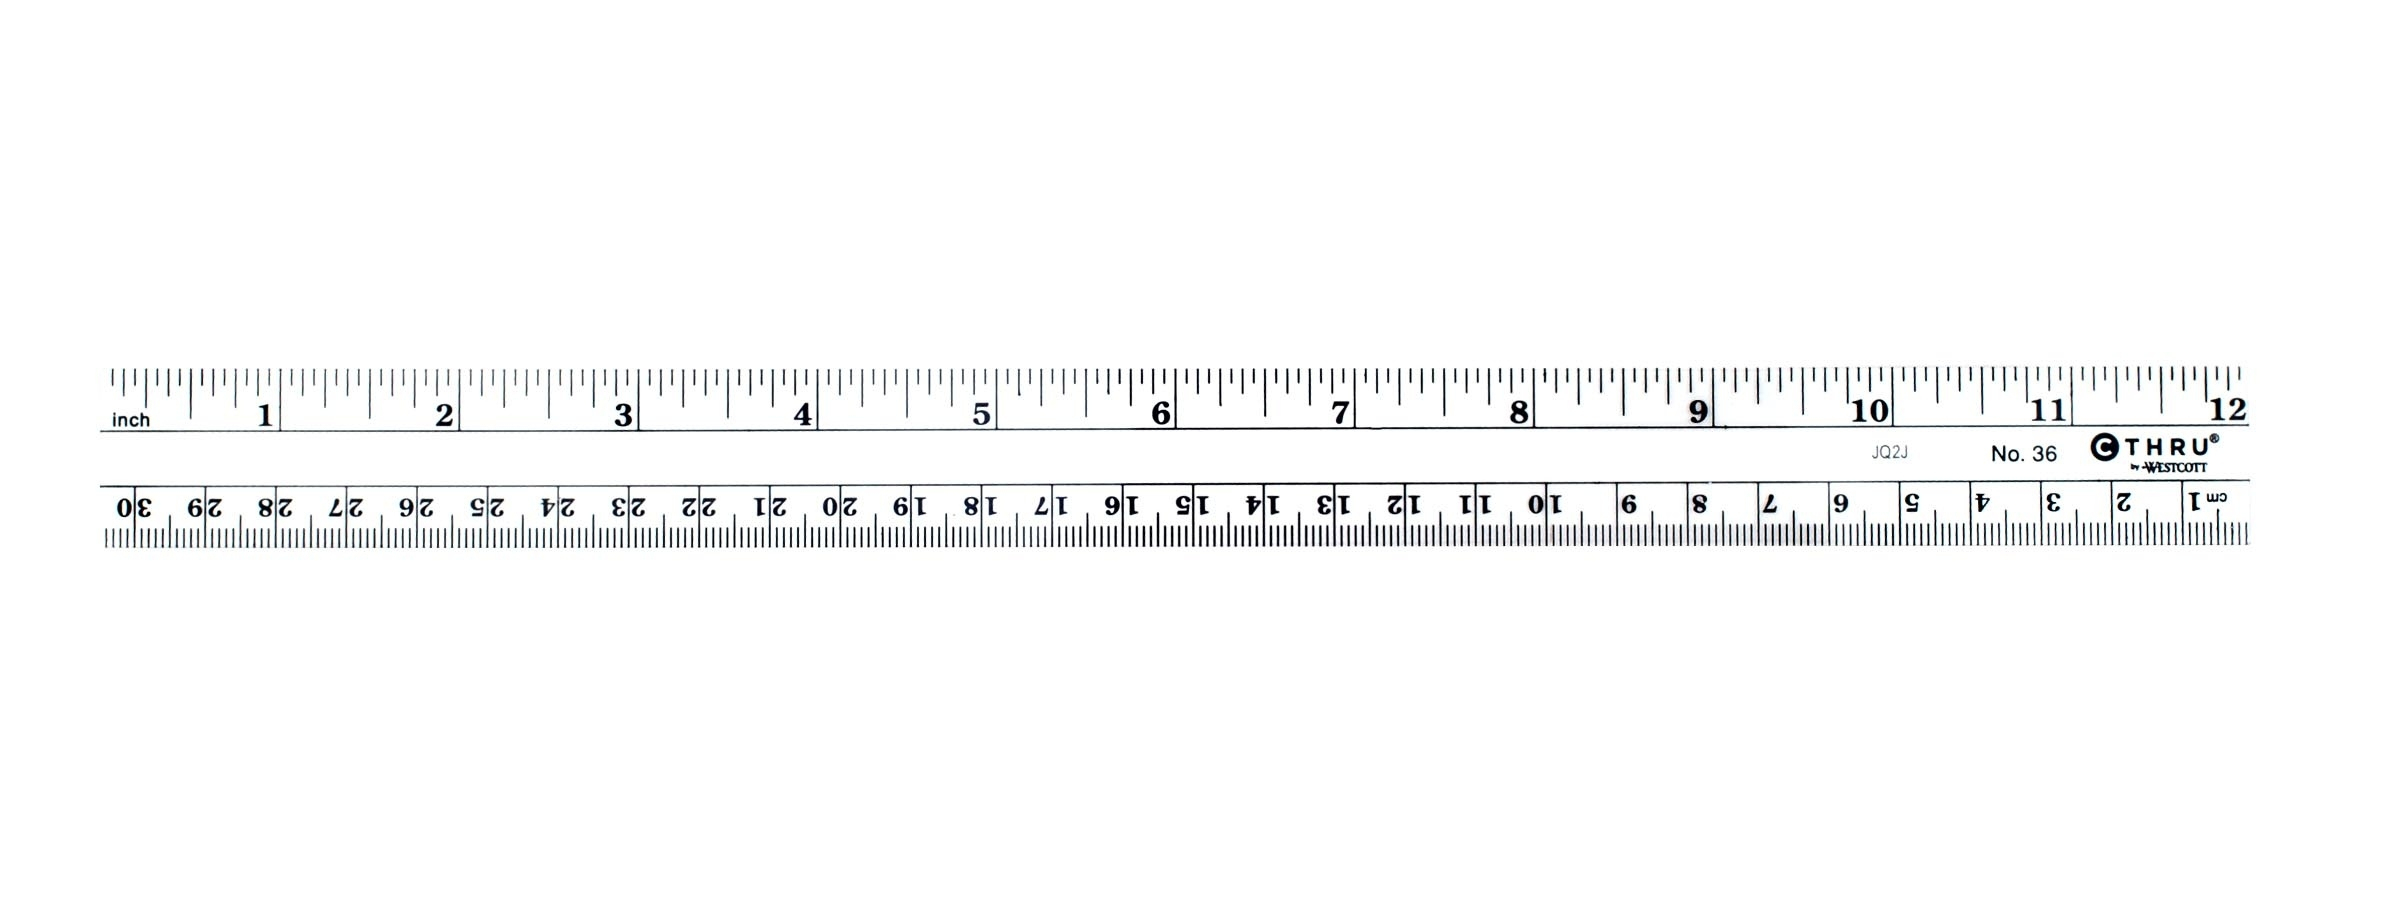 best templates actual 1 inch printable ruler actual size 6 inch 12